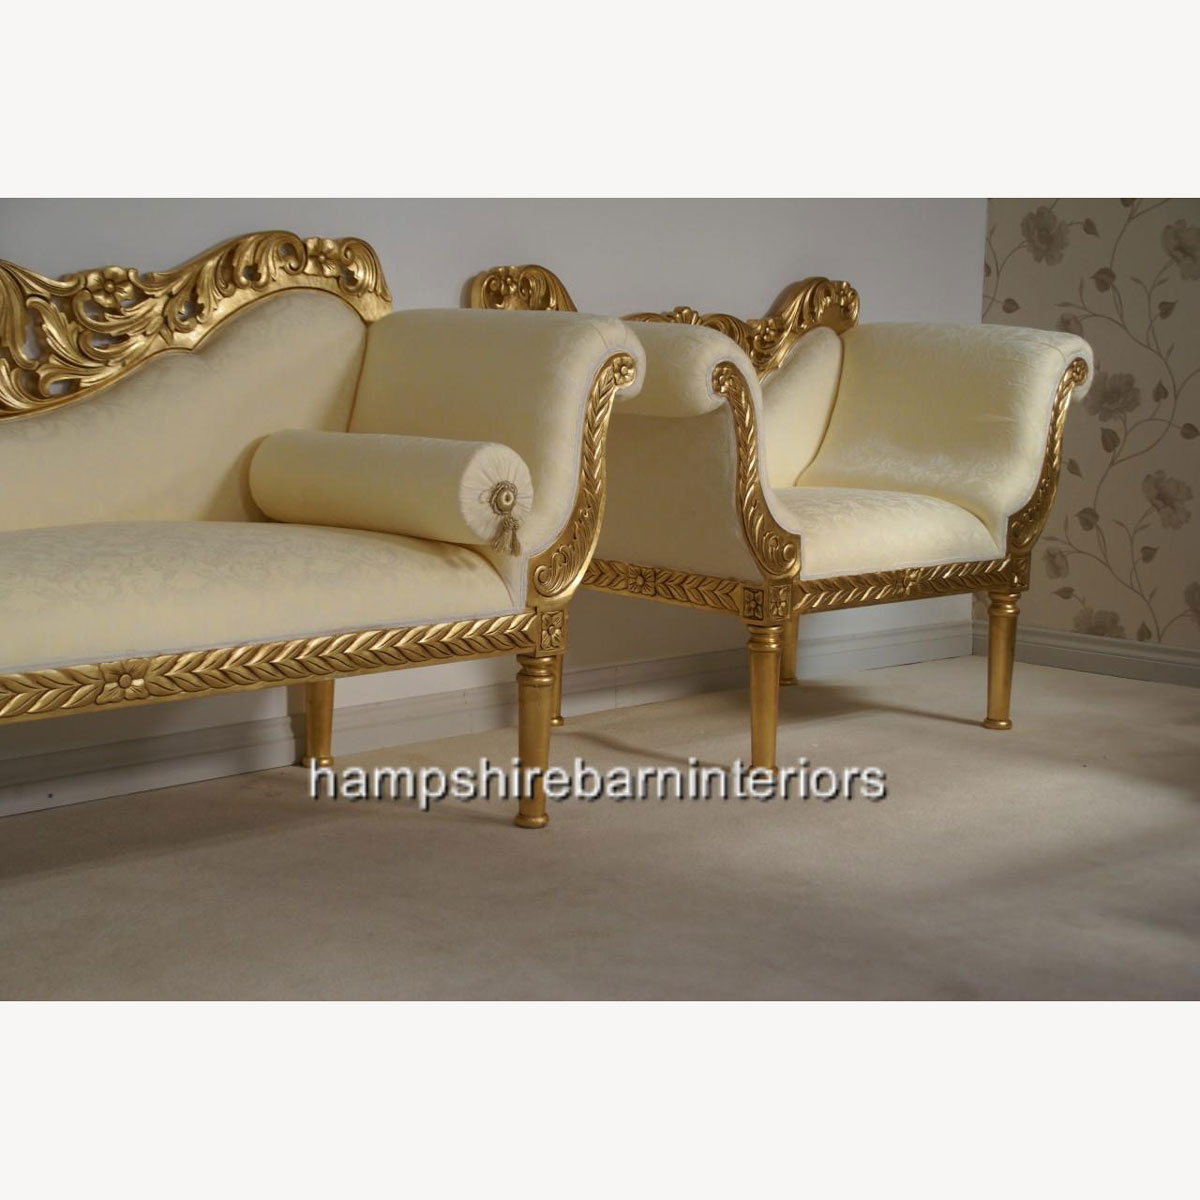 A Prianka 3 Piece Wedding Set Sofa Plus Two Chairs In Gold Leaf And Cream Optional Separate Stools Available 3 - Hampshire Barn Interiors - A Prianka 3 Piece Wedding Set (Sofa Plus Two Chairs) In Gold Leaf And Cream (Optional Separate Stools Available) -